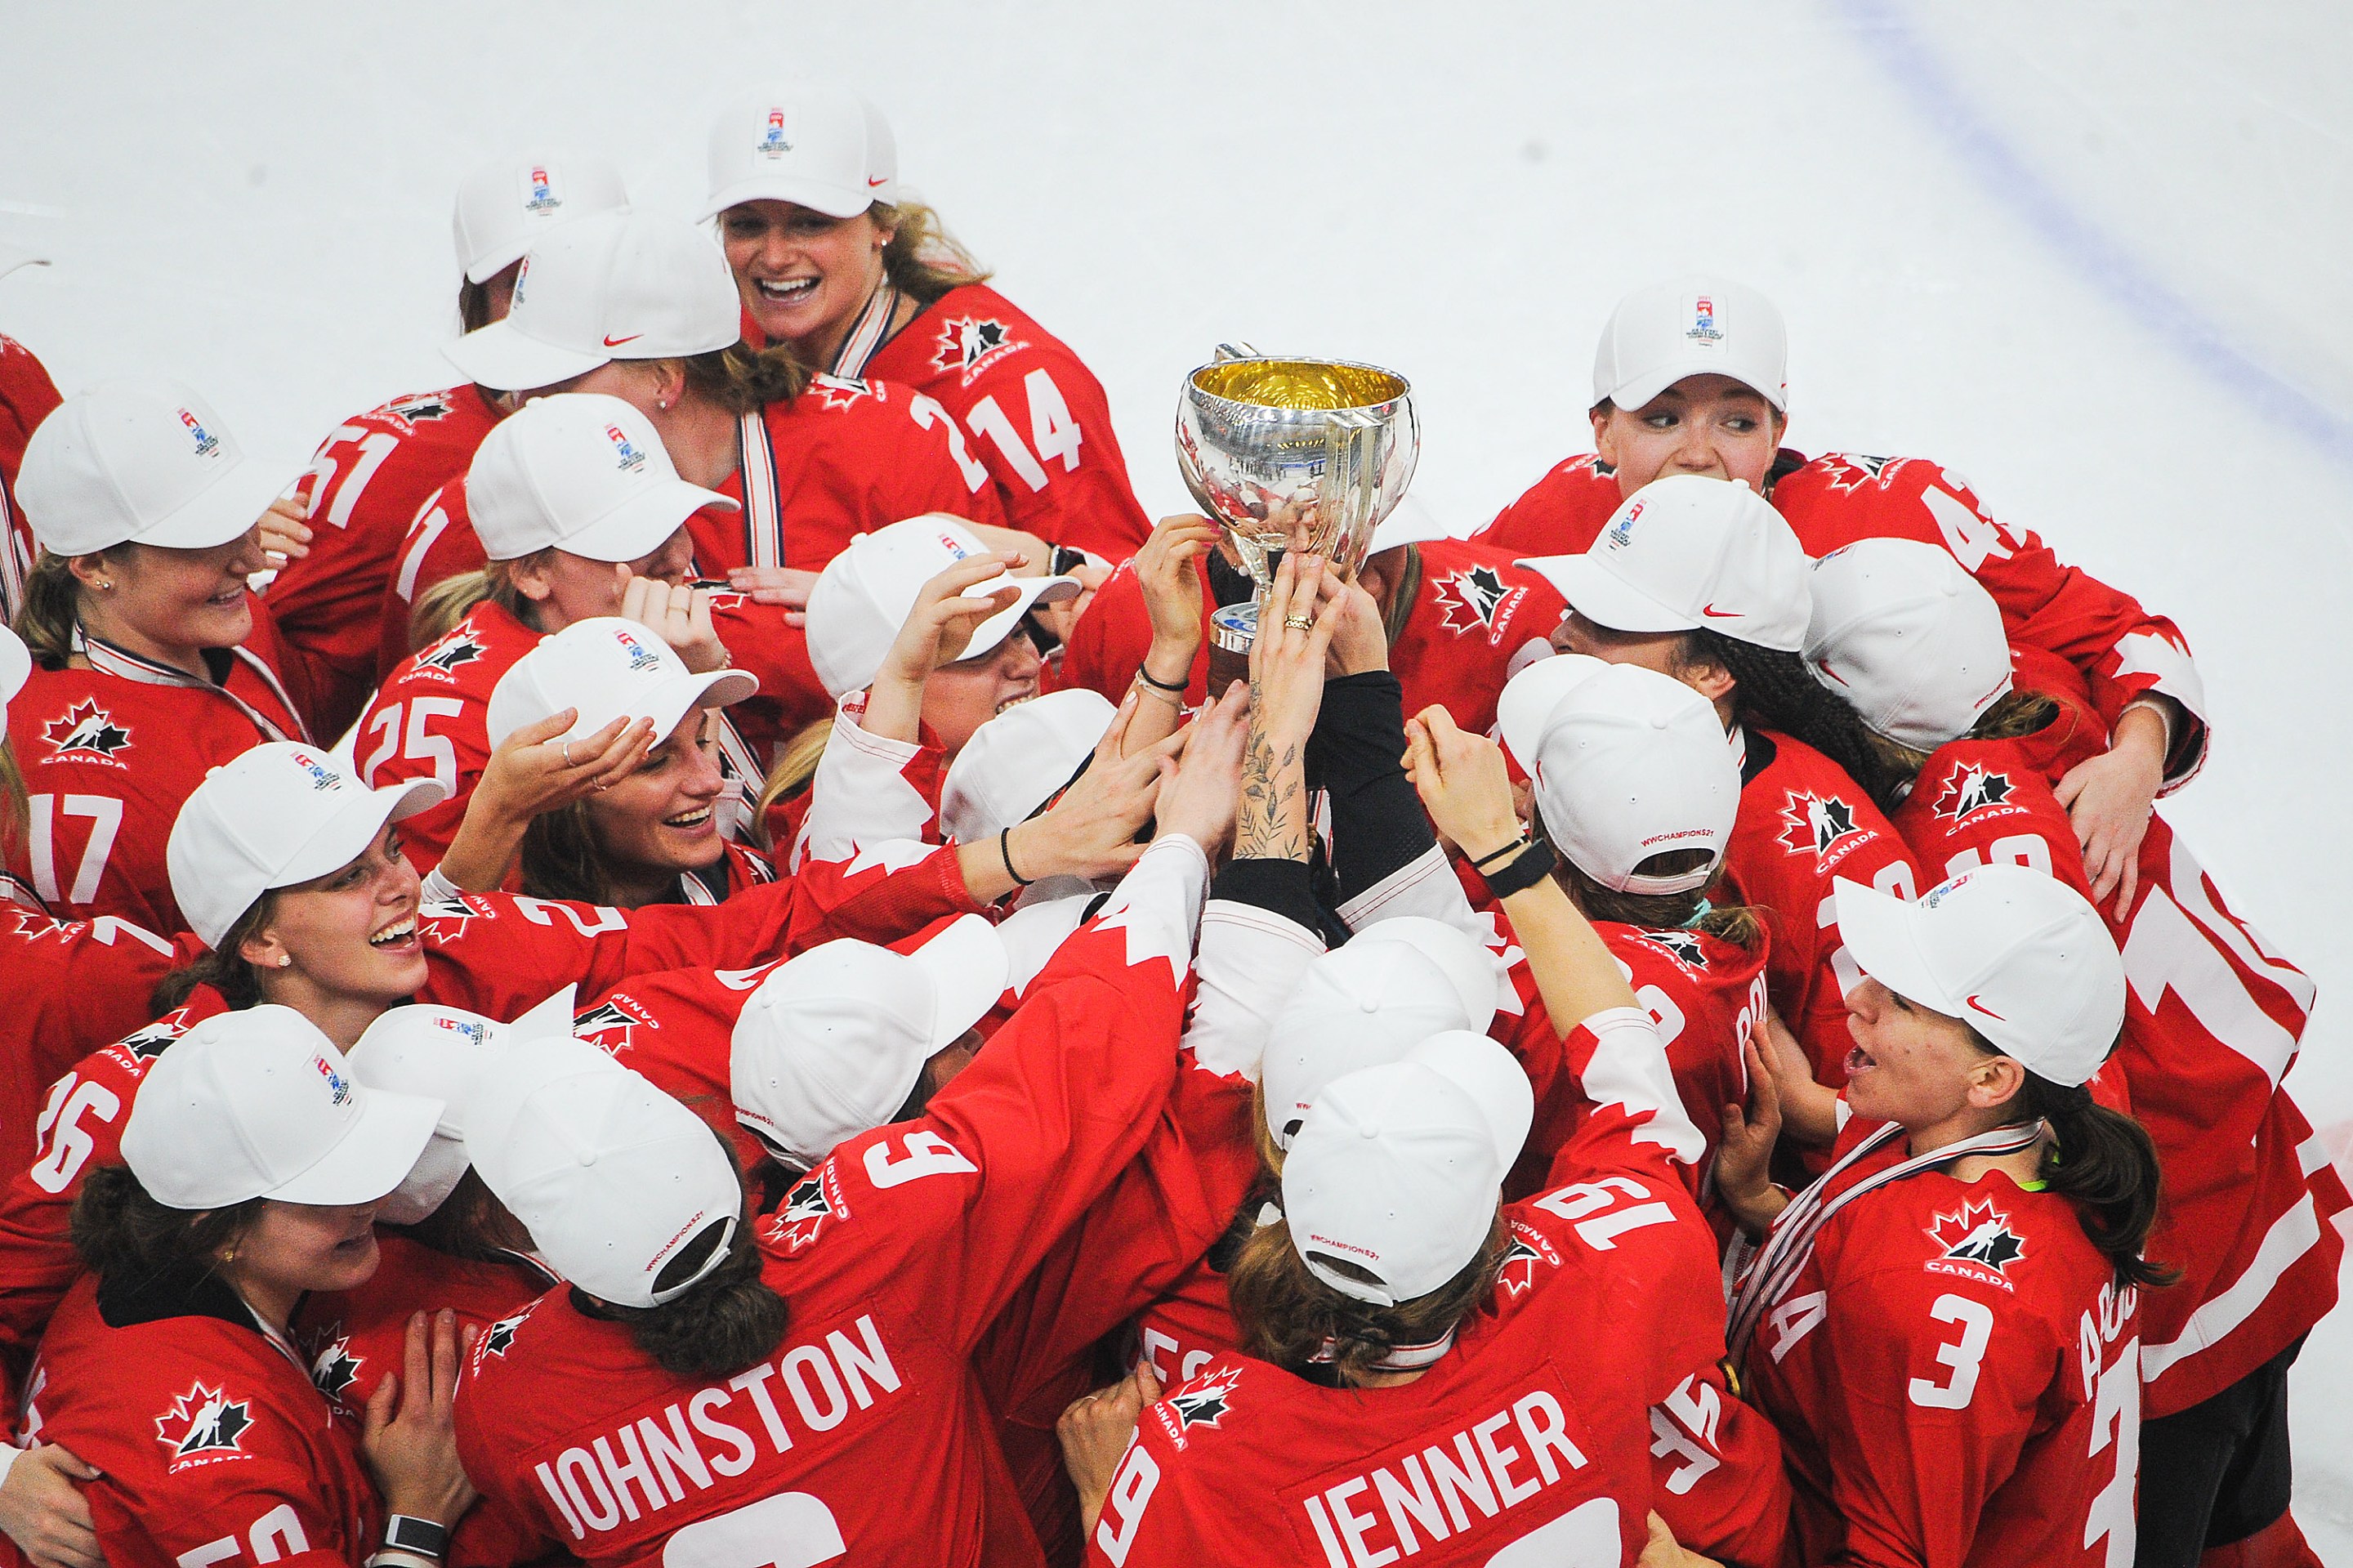 Team Canada hoists the championship trophy after their victory over United Sates in the 2021 IIHF Women's World Championship gold medal game played at WinSport Arena on August 31, 2021 in Calgary, Canada.